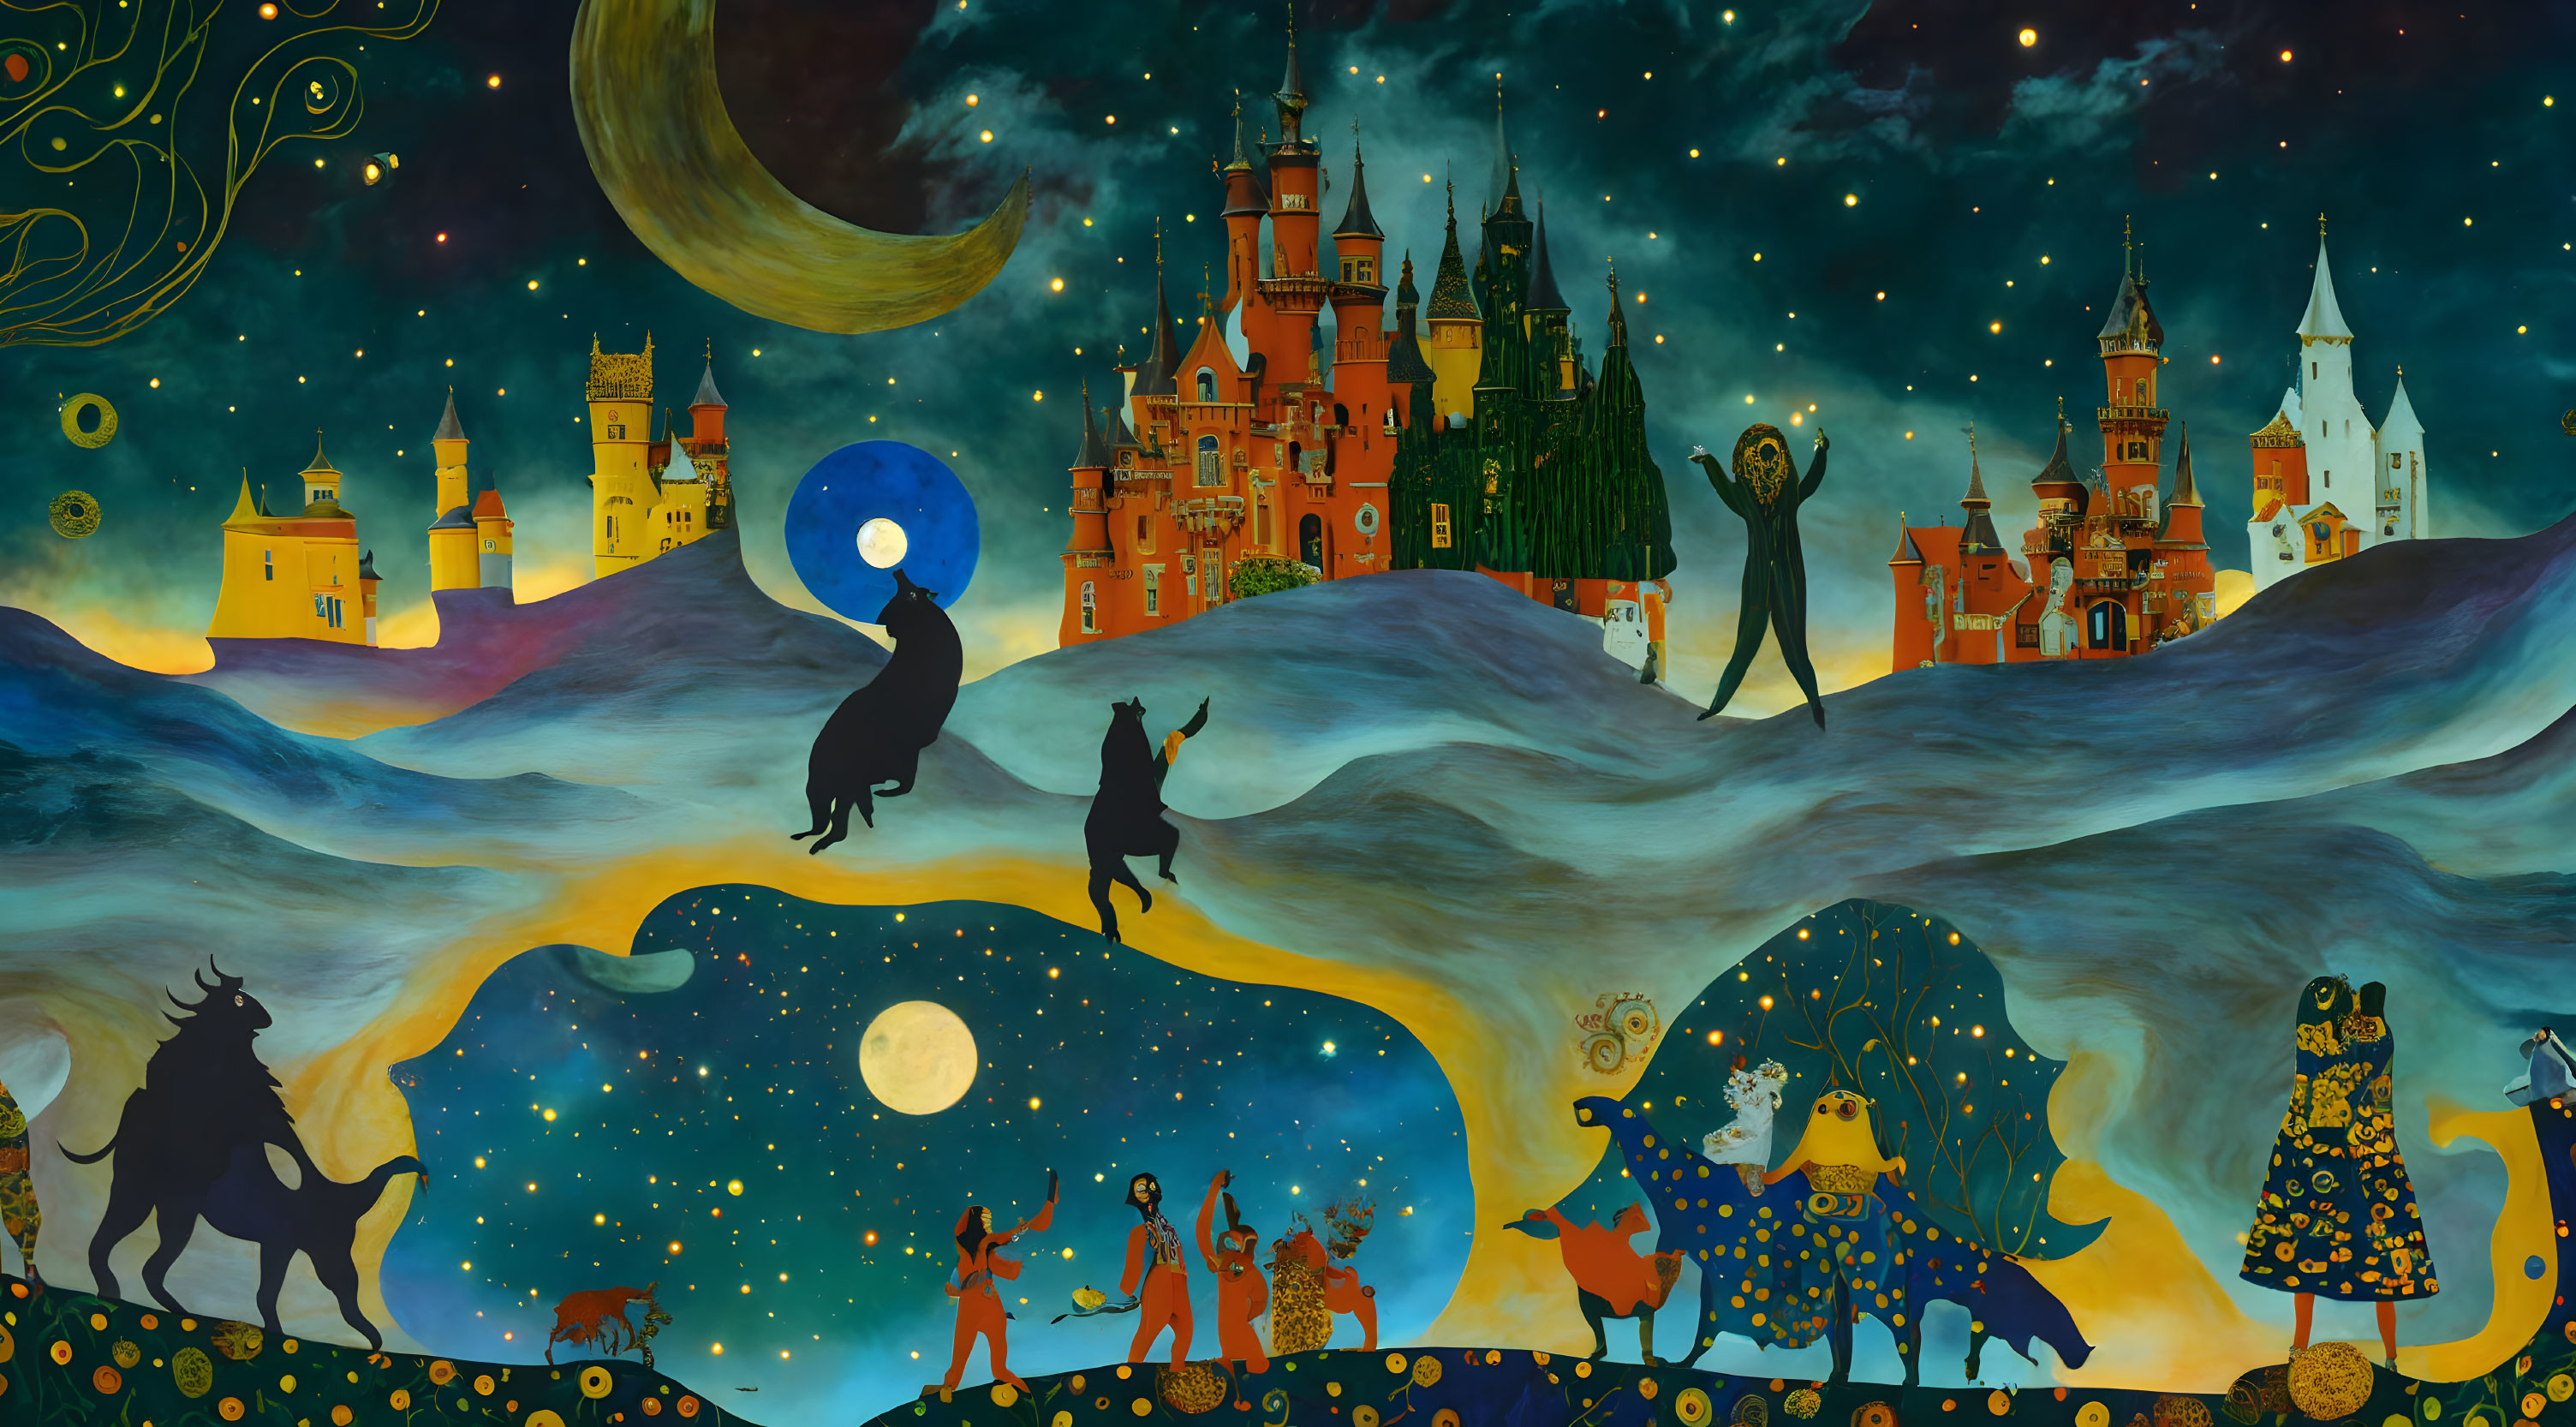 Fantastical landscape with castles, celestial bodies, and silhouetted figures under a star